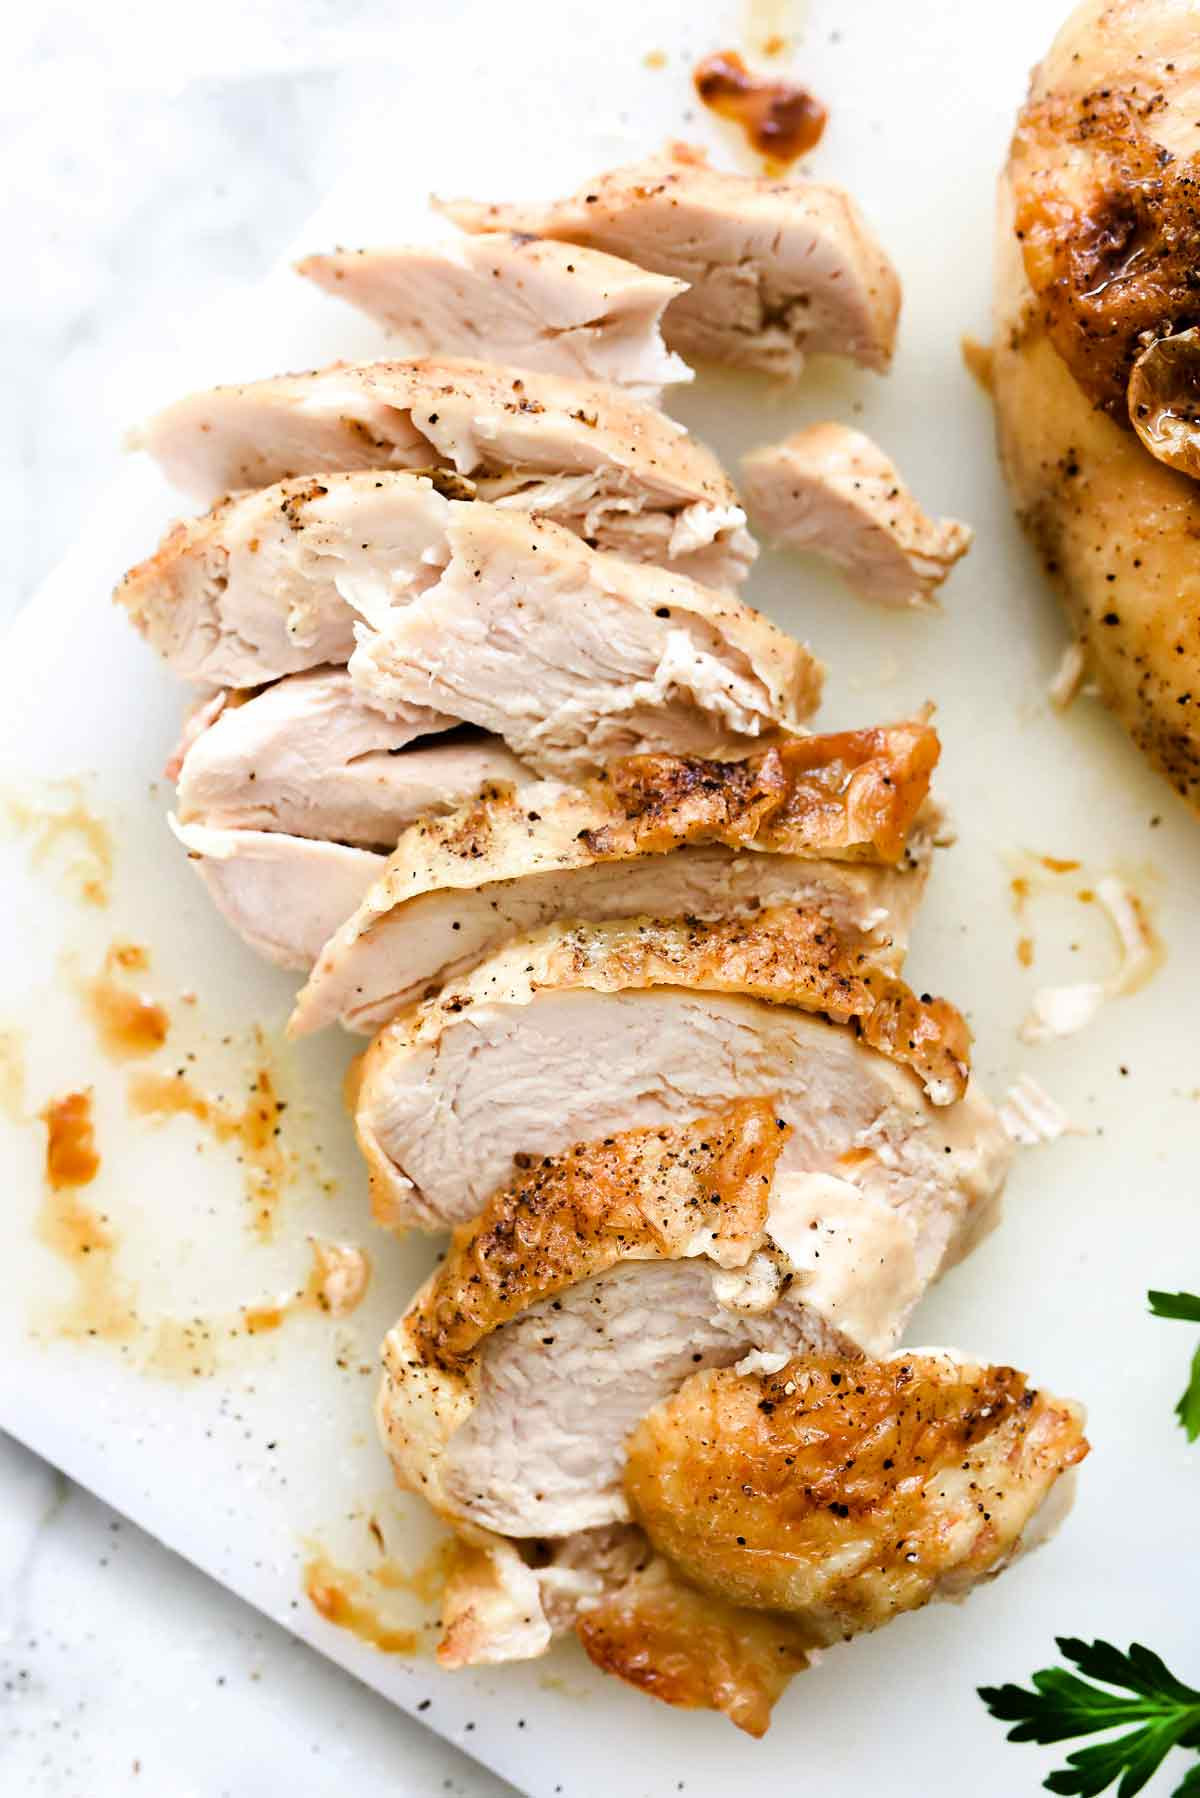 Good Baked Chicken Breast Recipe
 The Best Baked Chicken Breast Recipe So Juicy